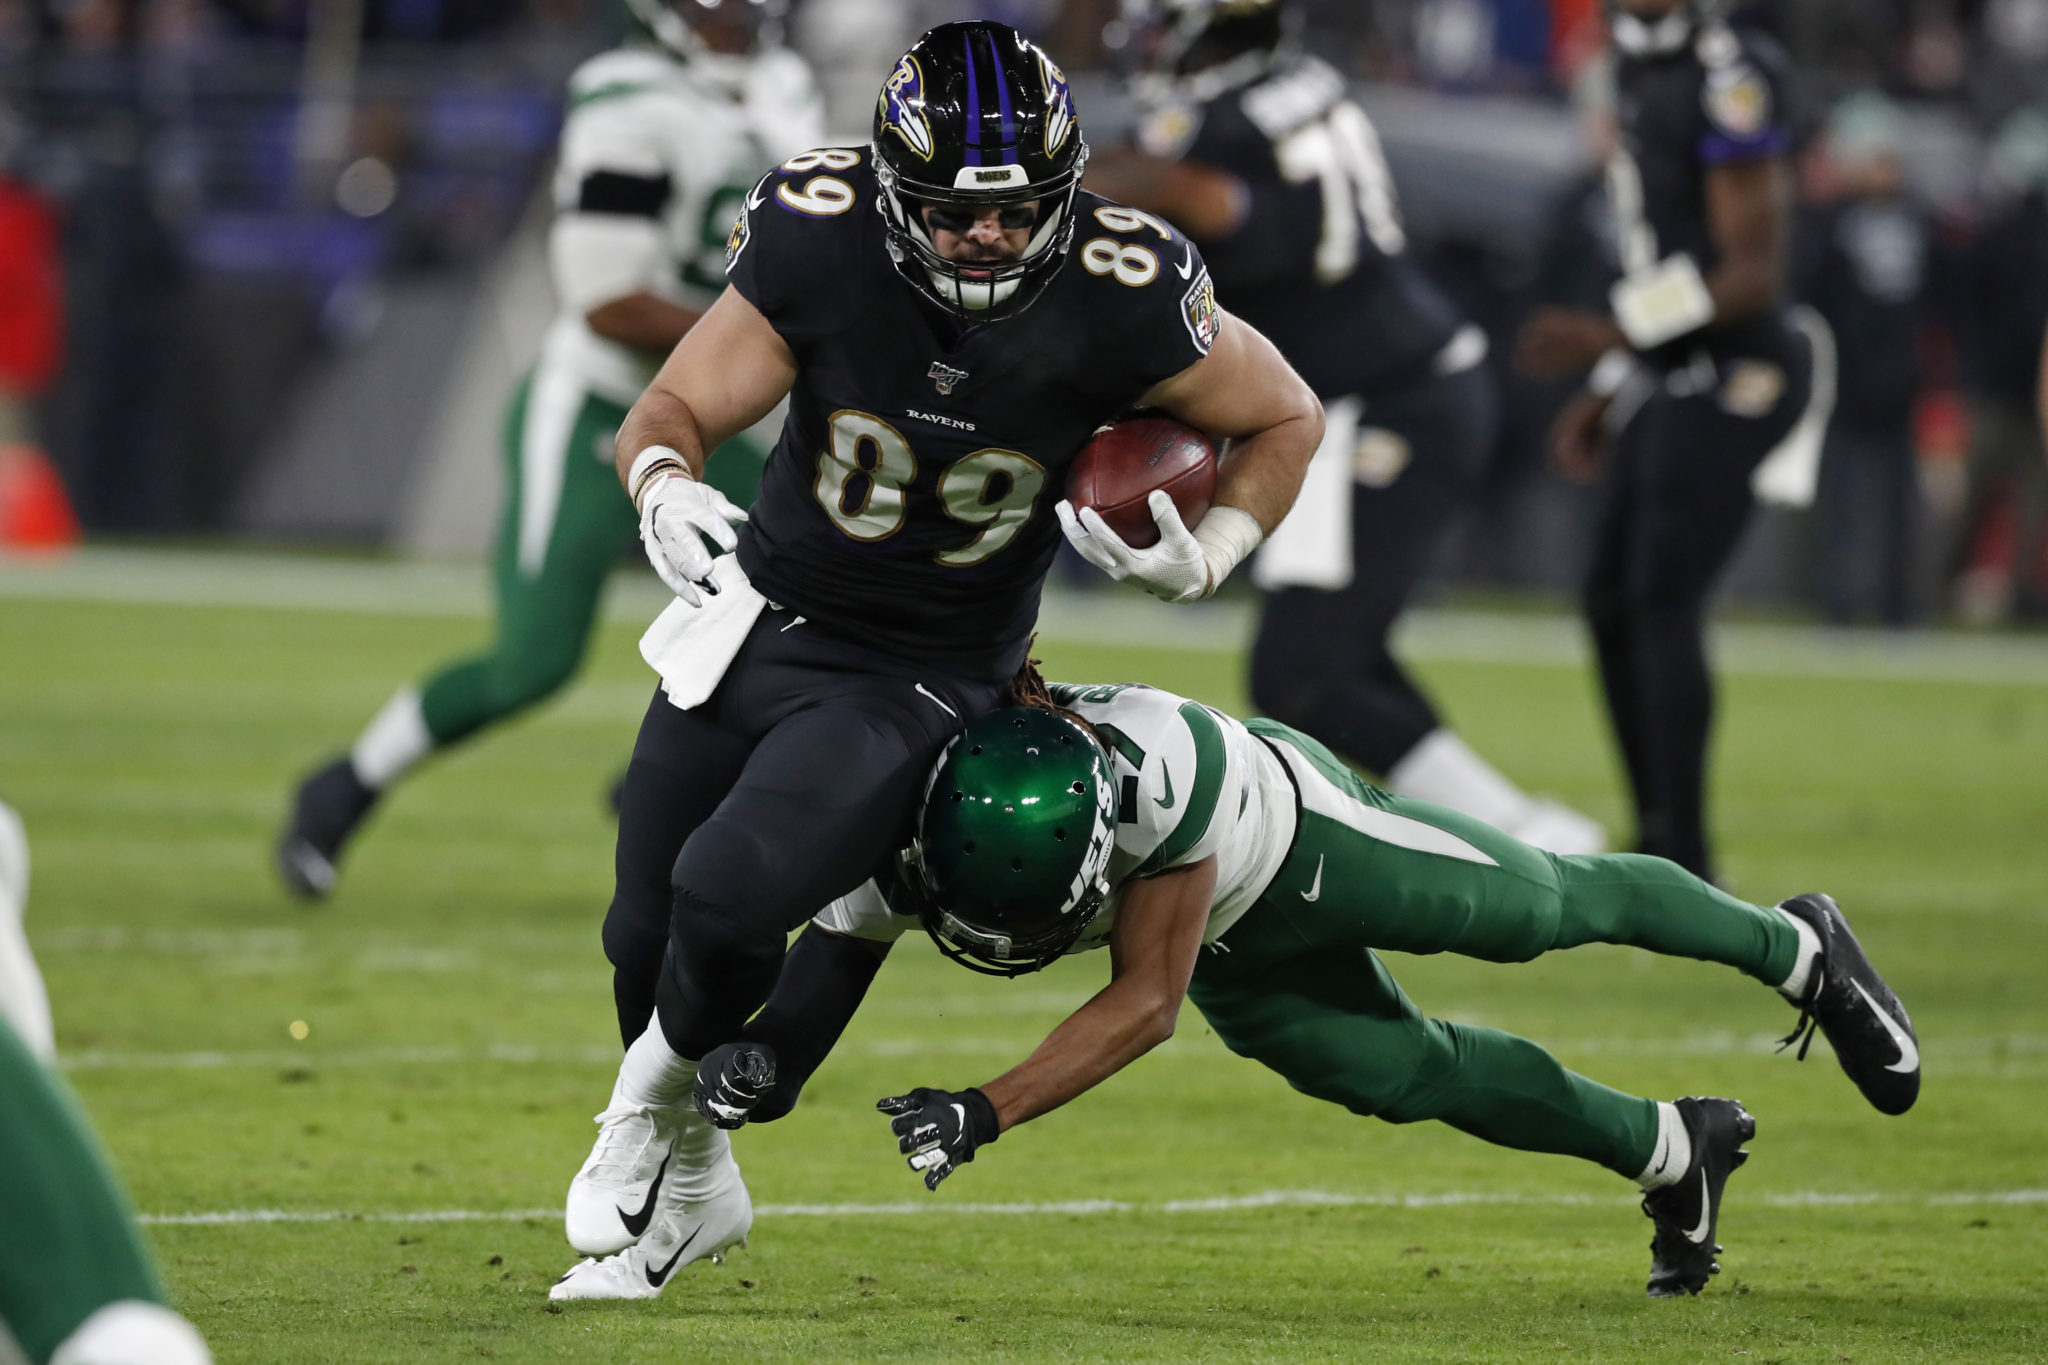 BALTIMORE, MARYLAND - DECEMBER 12: Tight end Mark Andrews #89 of the Baltimore Ravens runs with the ball during the first quarter against the New York Jets at M&T Bank Stadium on December 12, 2019 in Baltimore, Maryland.